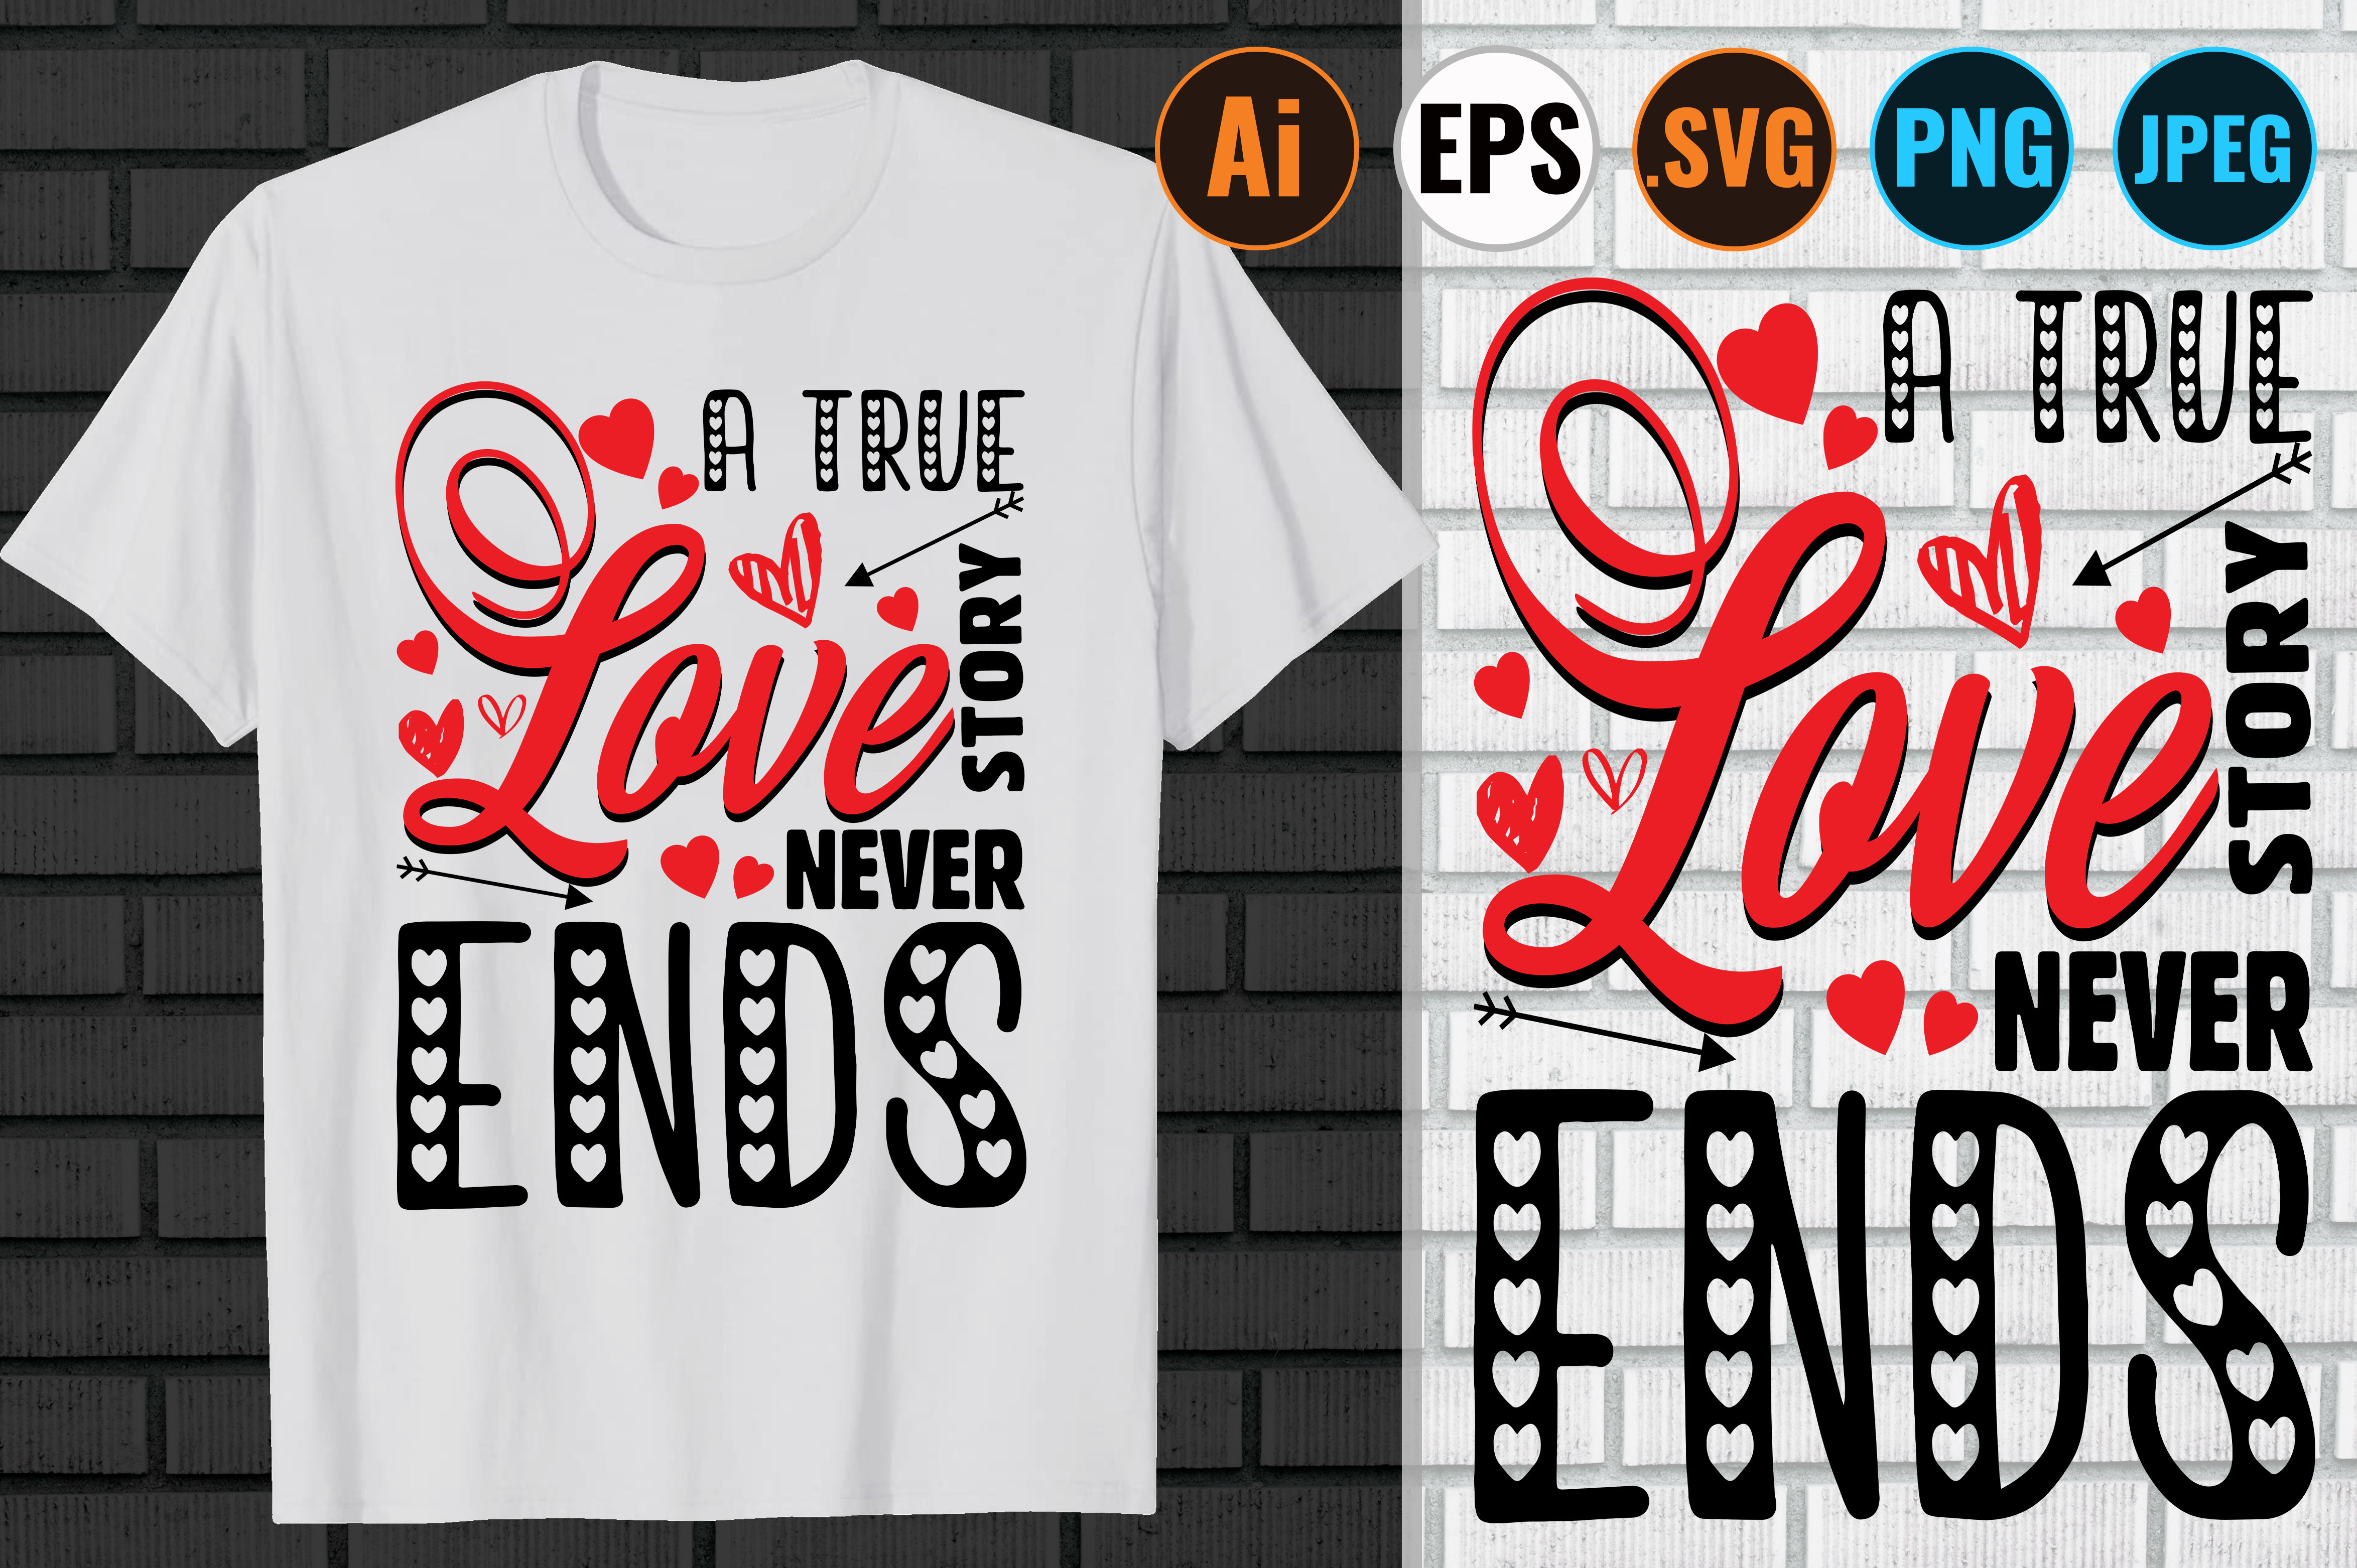 Valentines T-shirt Design 5 Graphic by aminulxiv · Creative Fabrica